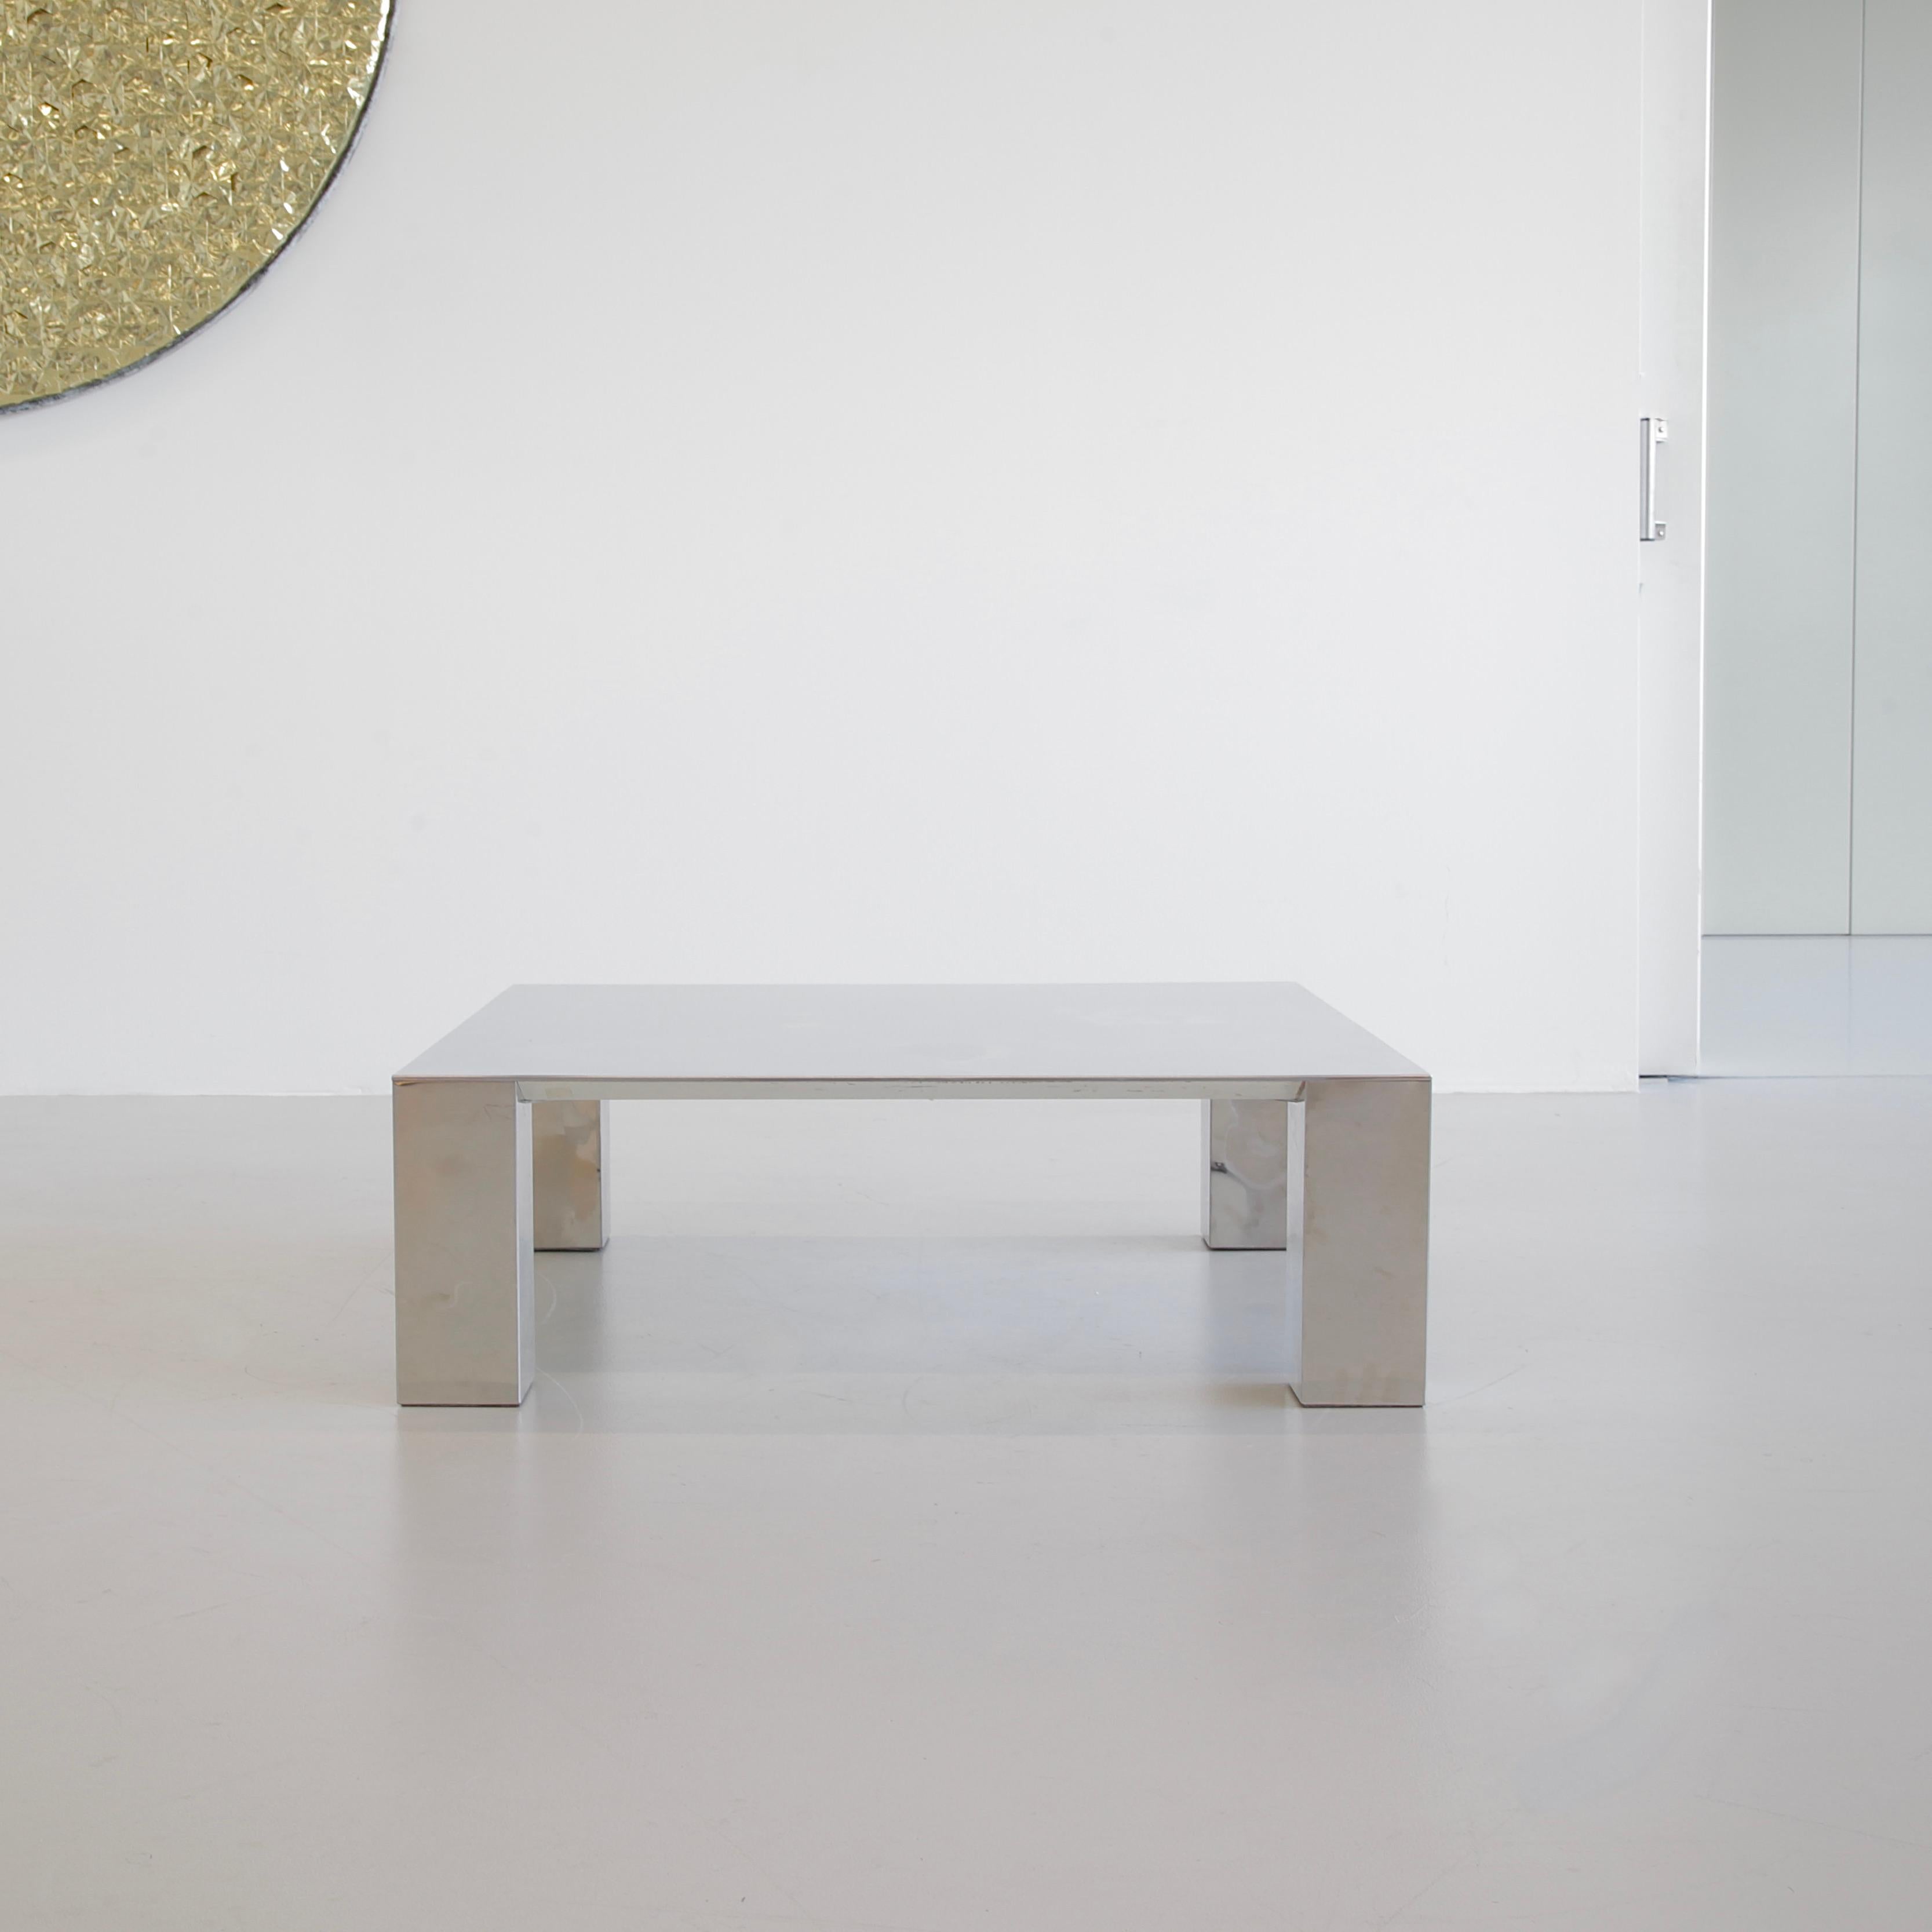 Coffee table designed by Giovanno Offredi, Italy, Saporiti, 1970.

The 'TEBE' coffee table by Offredi with wooden structure and polished stainless steel surface. Super elegant and large coffee table produced by Saporiti in Italy.